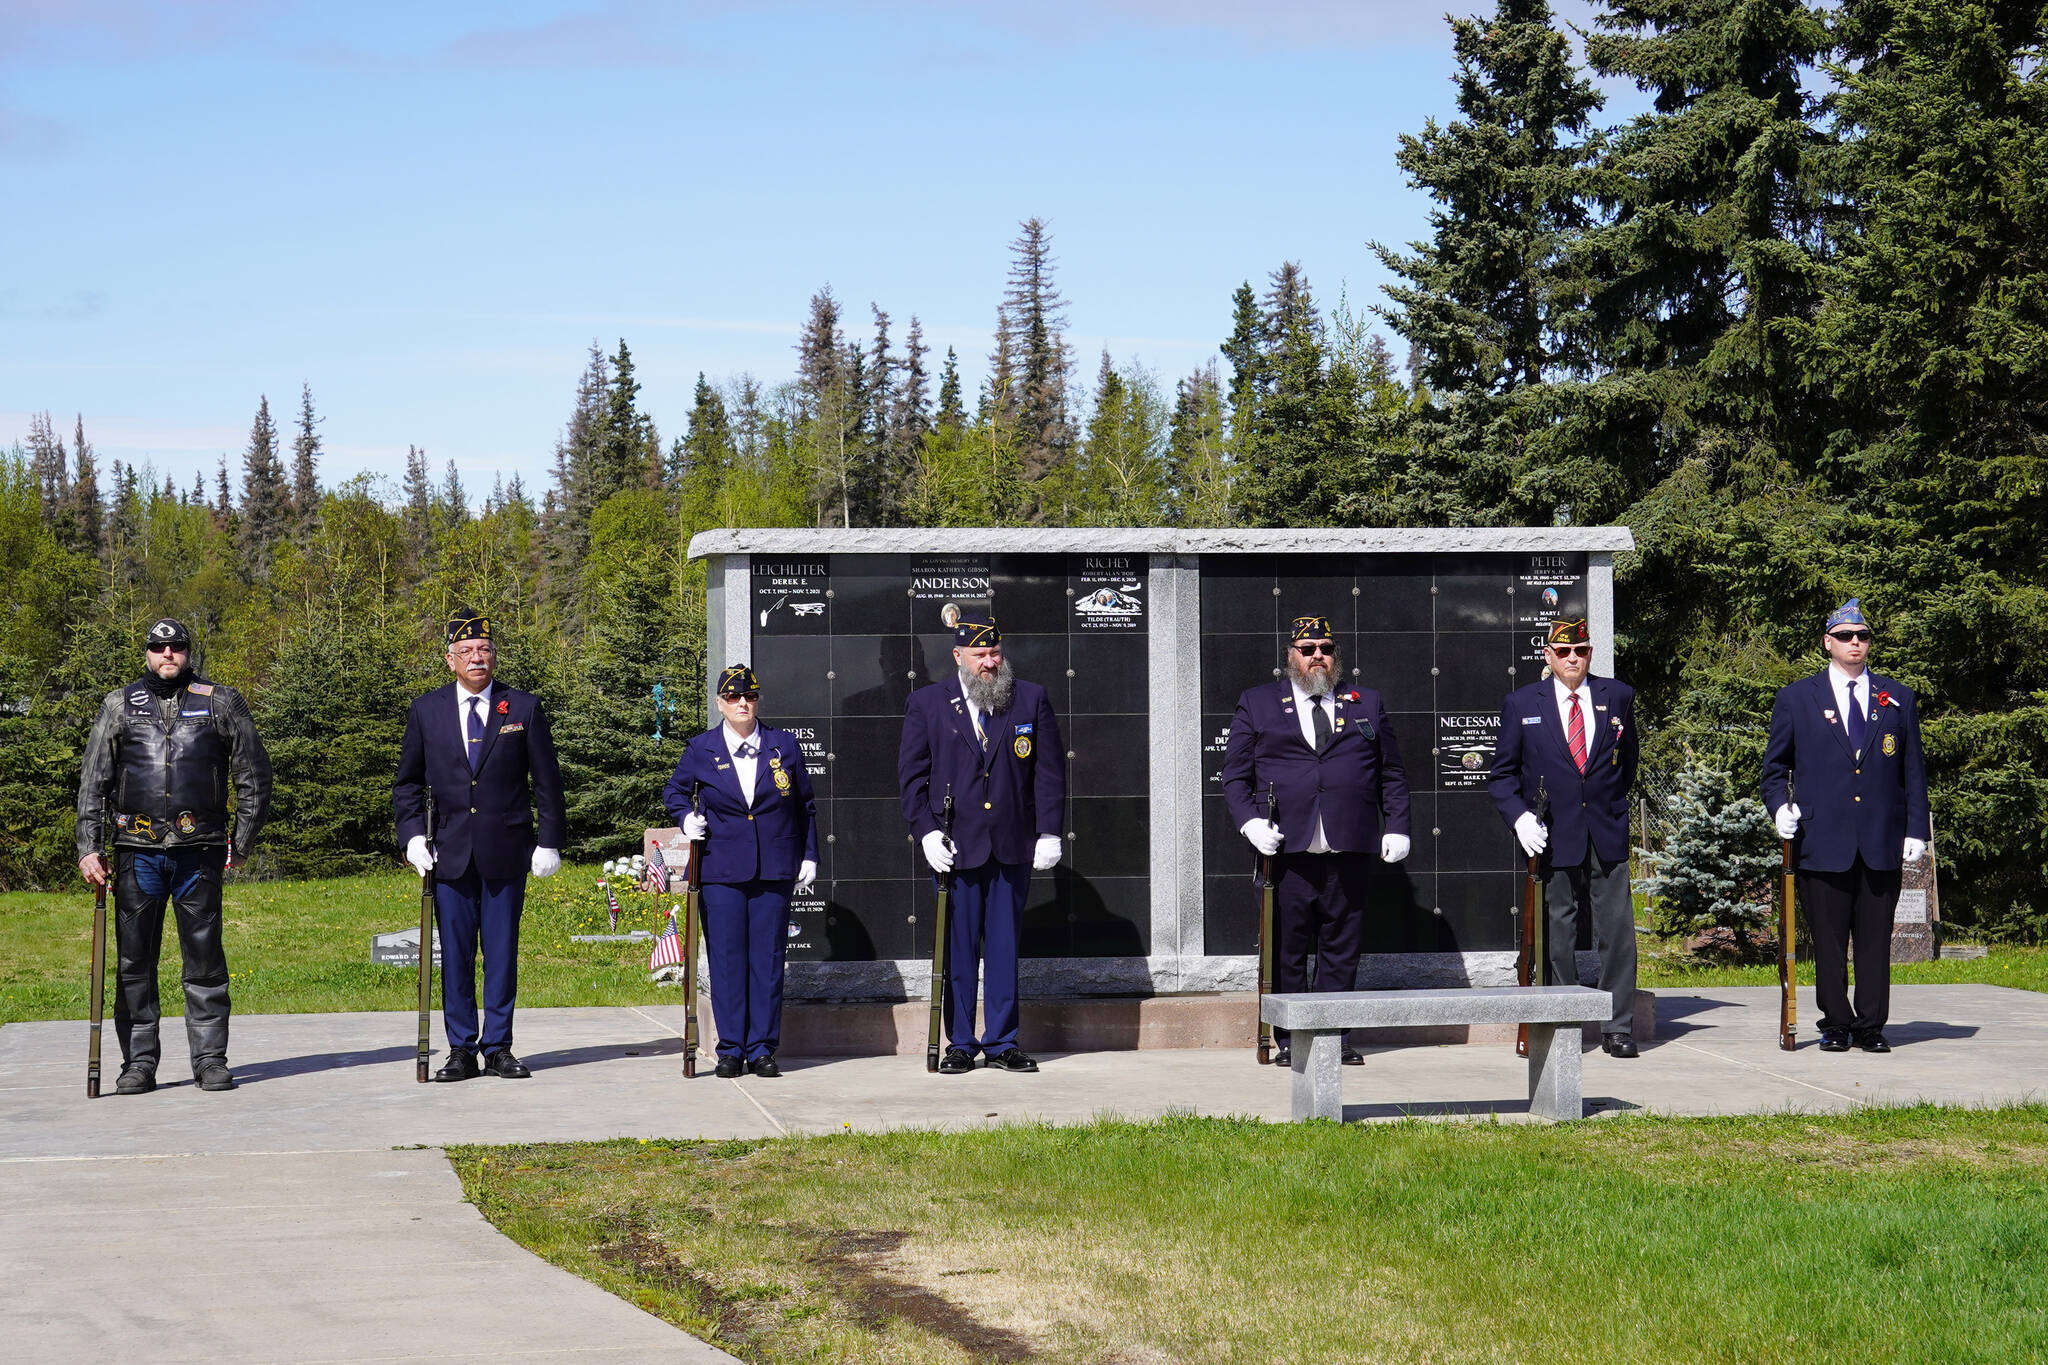 American Legion Post 20 members lead a salute during a Memorial Day ceremony on Monday, May 29, 2023, at the Kenai Cemetery in Kenai, Alaska. (Jake Dye/Peninsula Clarion)